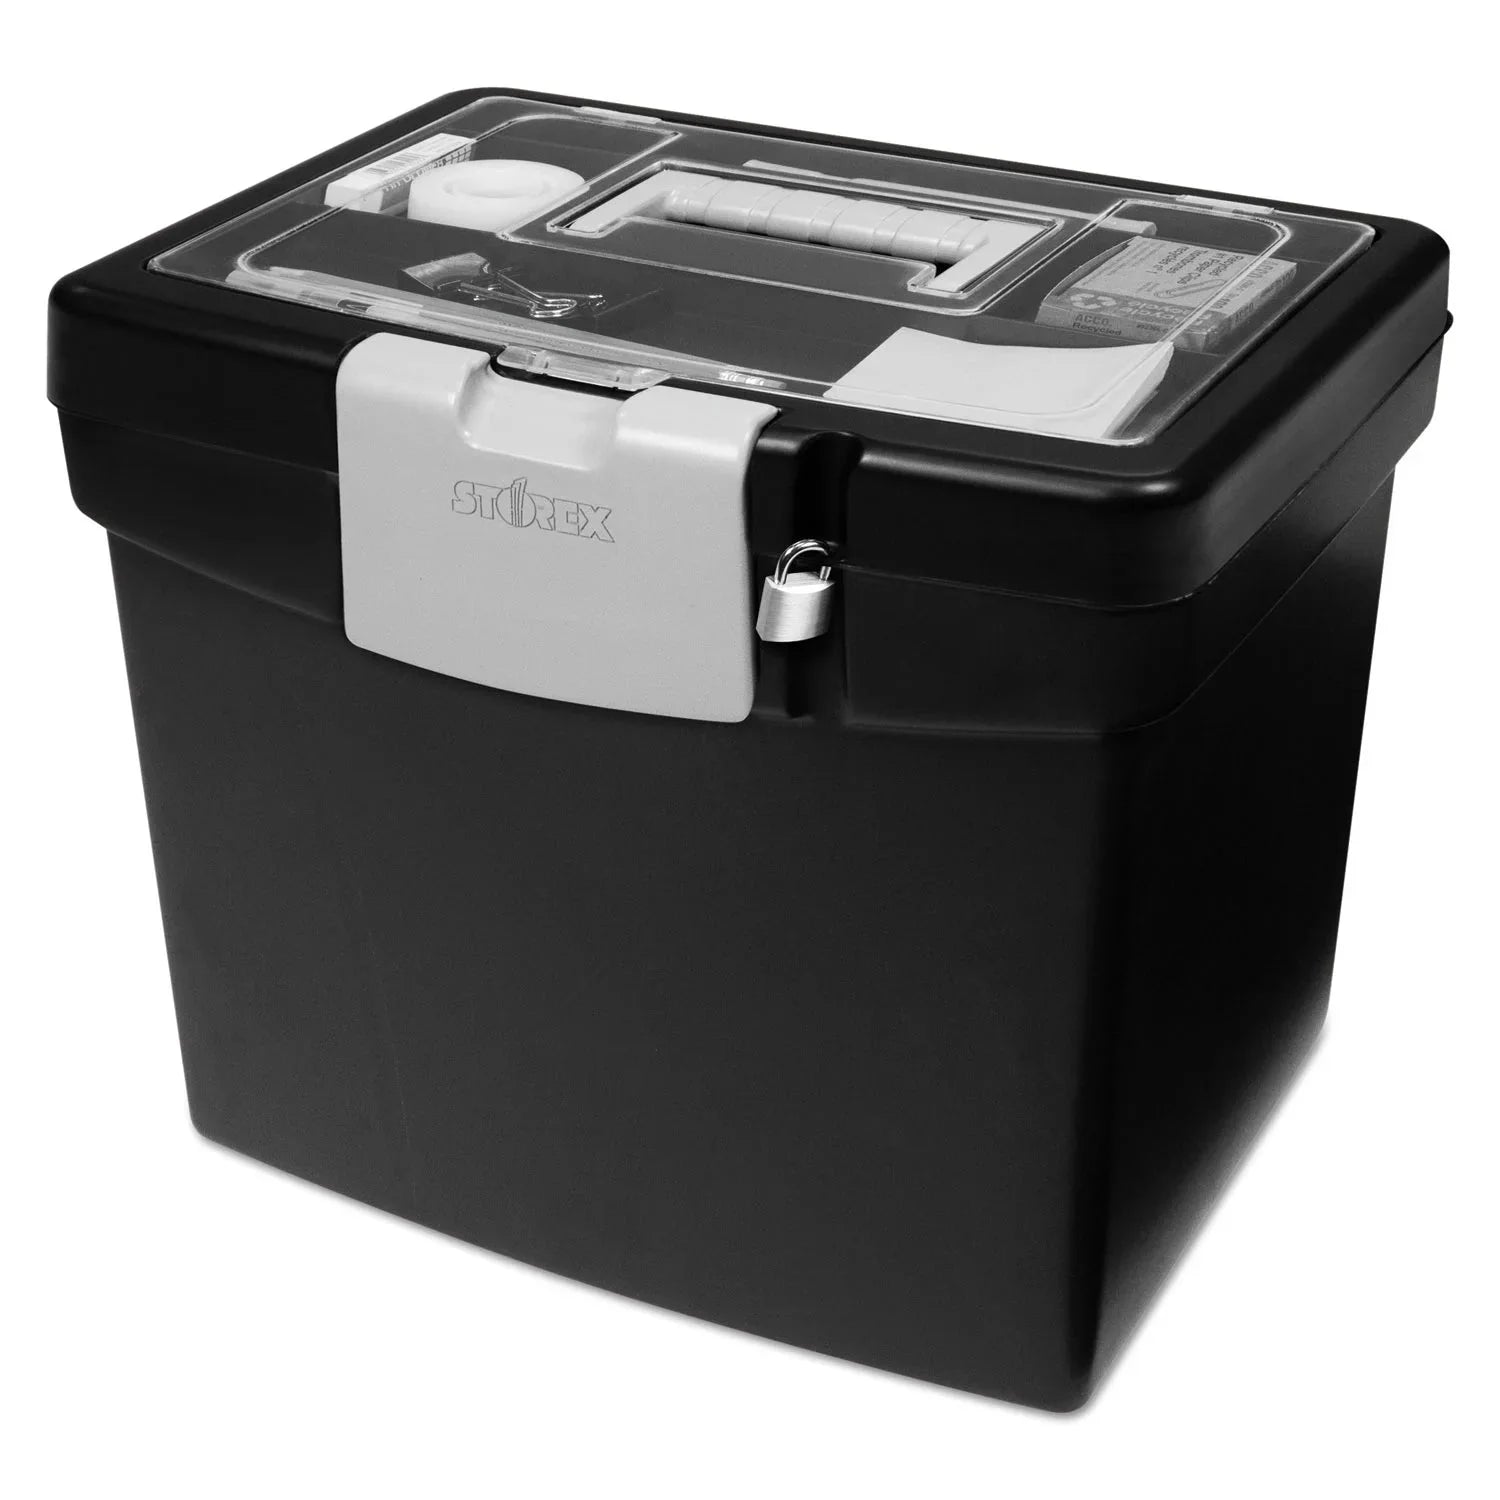 Wholesale prices with free shipping all over United States Storex Plastic File Storage Box with XL Storage Lid, Fits Letter-size Paper, Black/Gray - Steven Deals